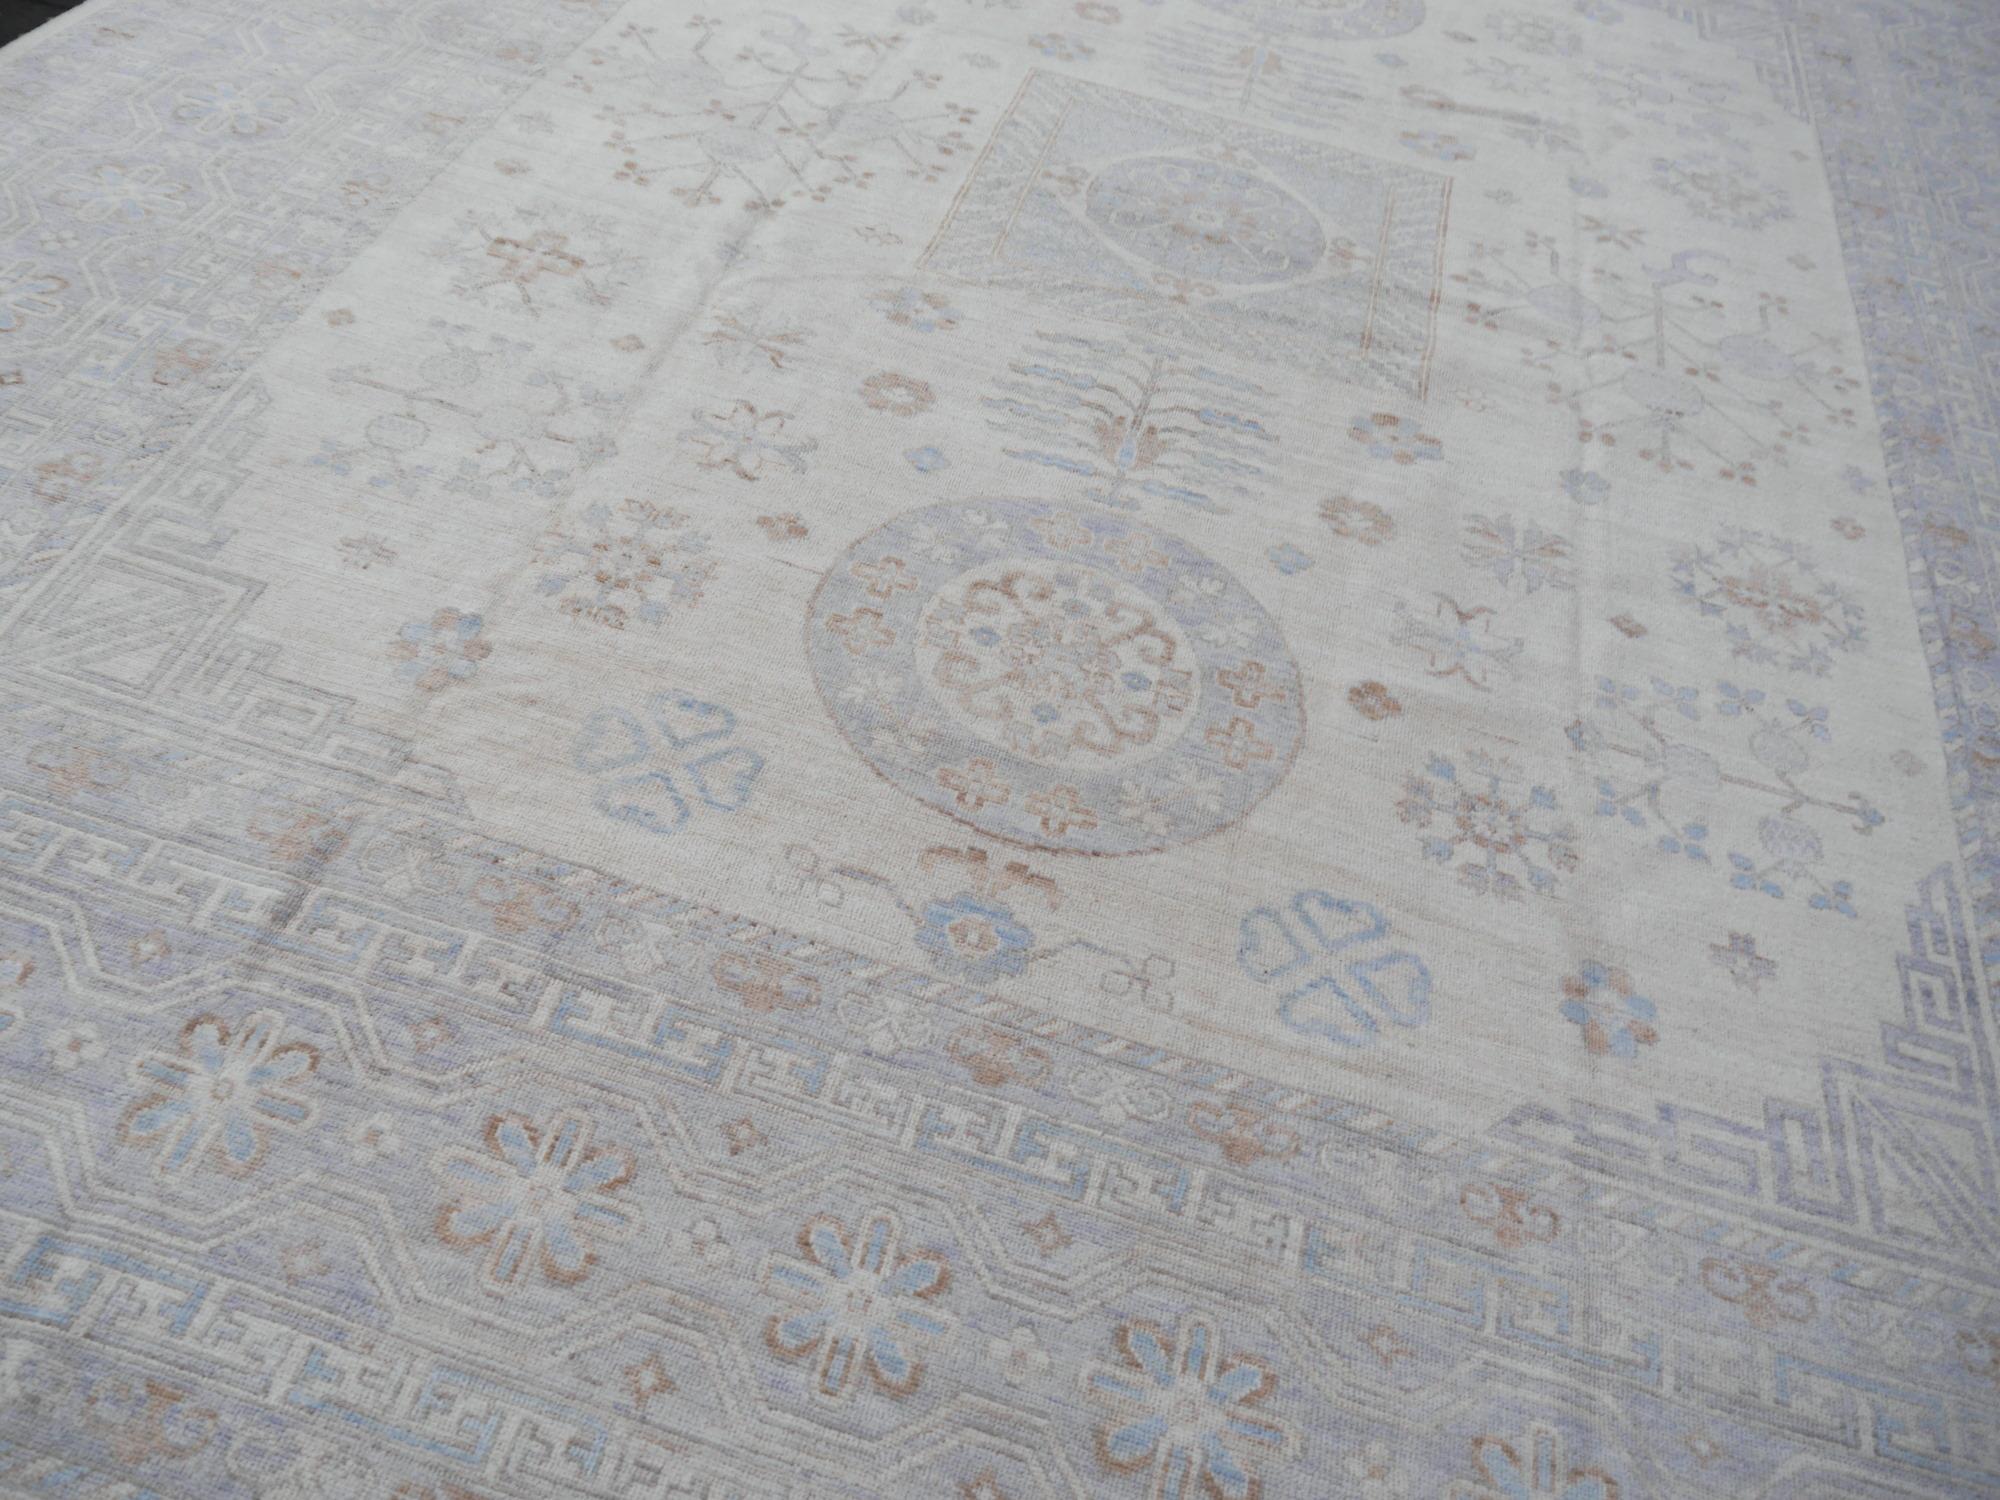 Afghan Large Samarkand Khotan Style Rug Hand Knotted Contemporary White Gray Oversized